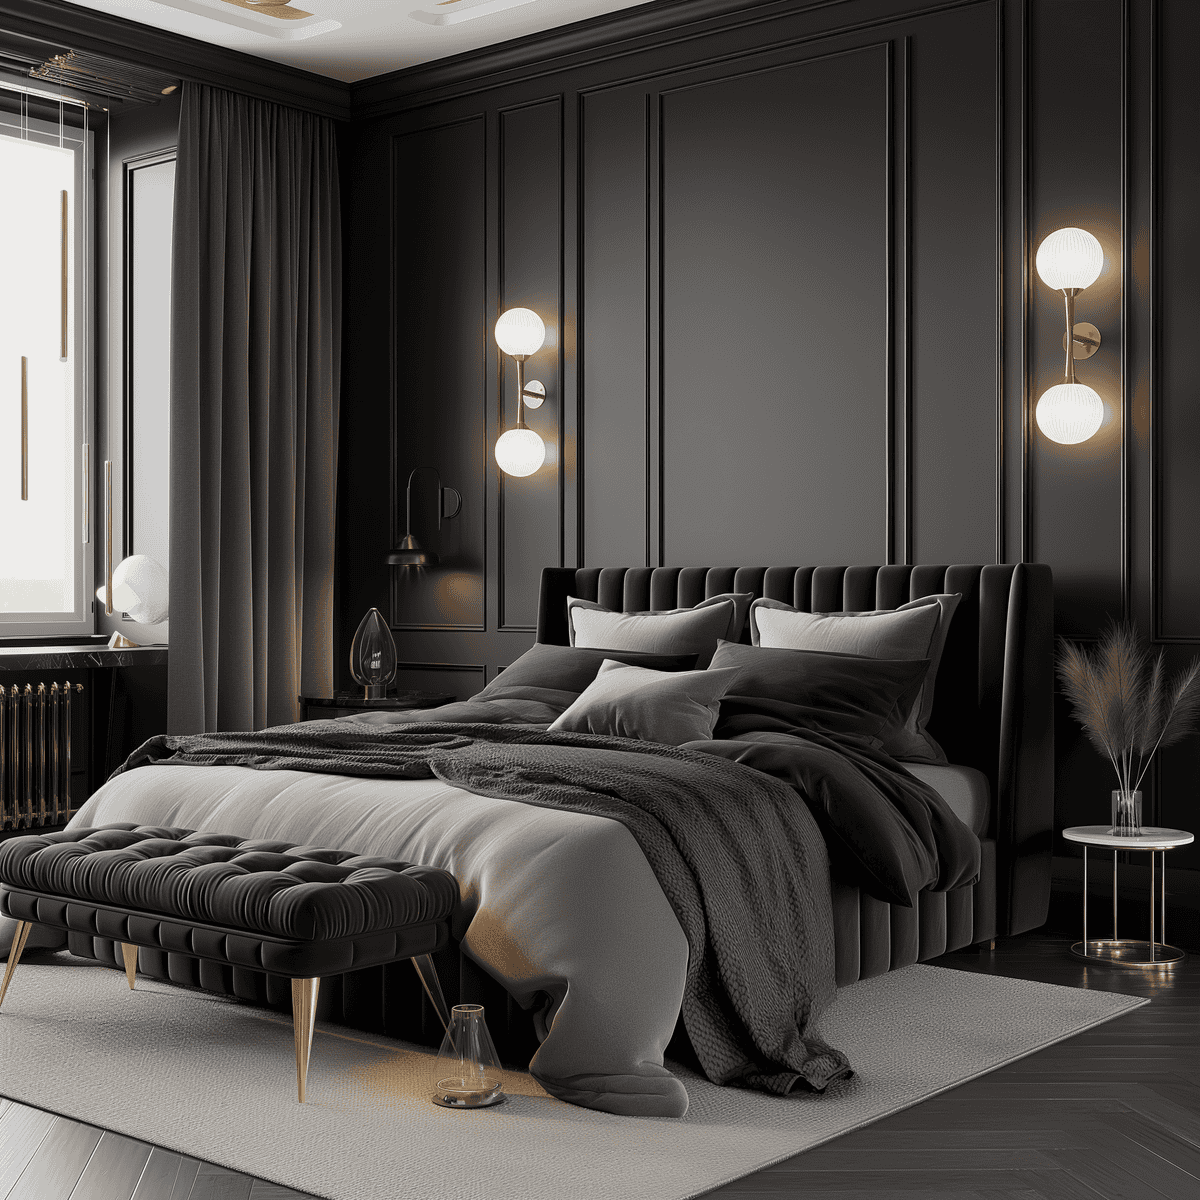 133_stylish_home_bedroom._black_tones_with_gold_accen_bd493bf9-b404-47af-a4ae-330ea325e273